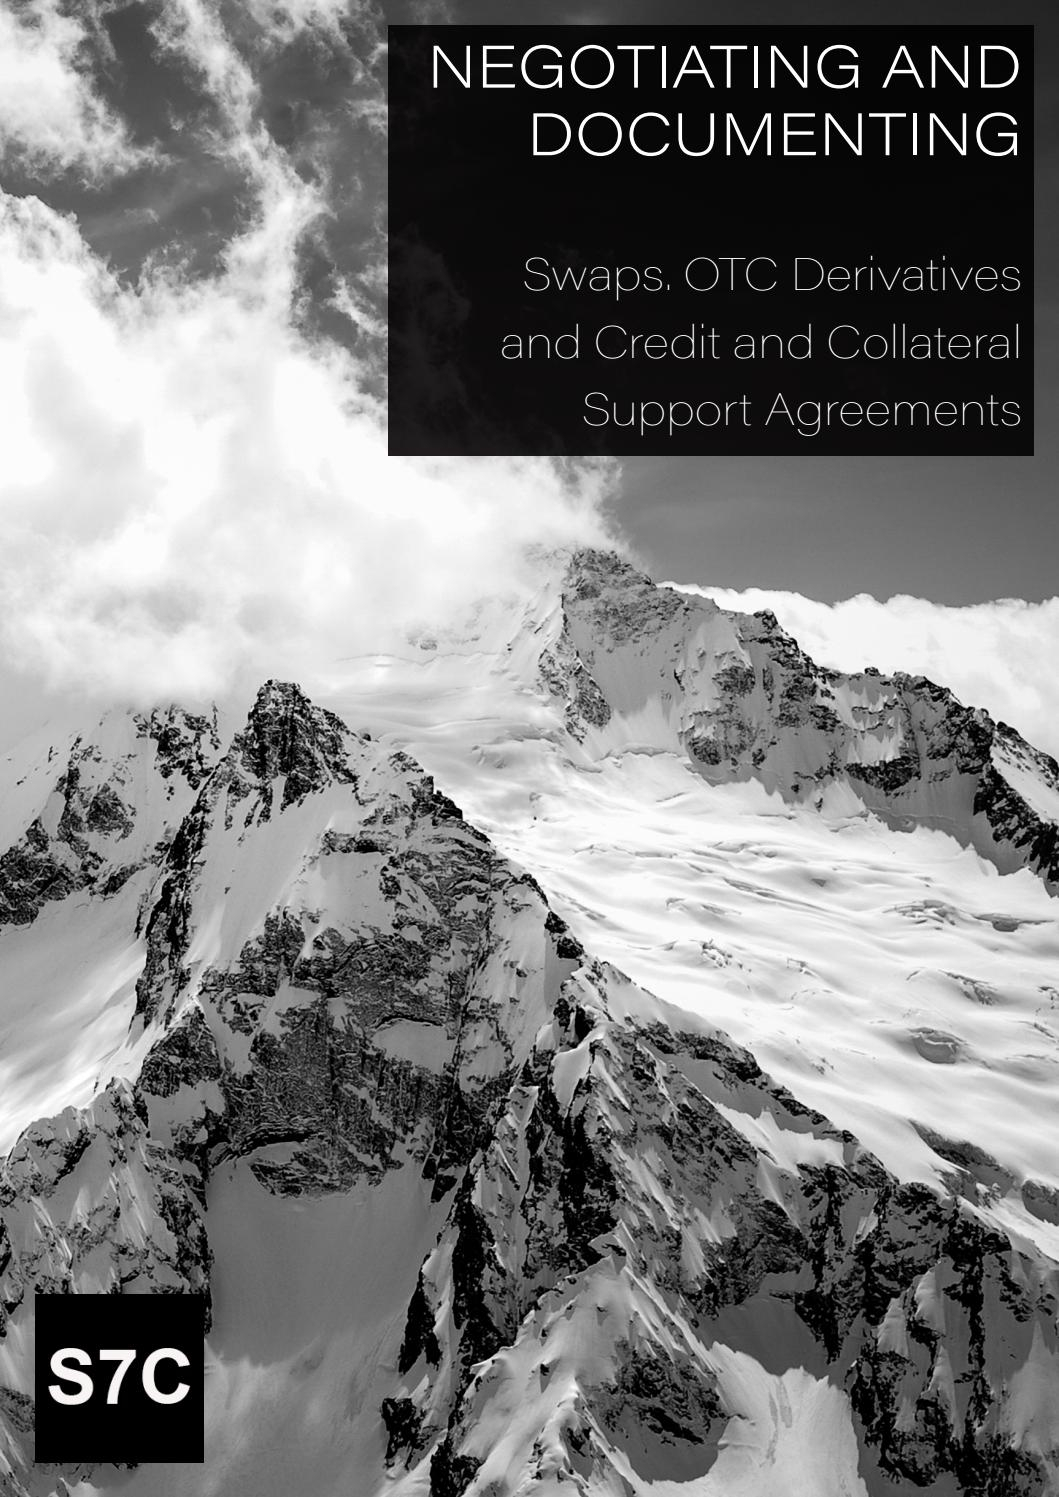 Collateral Management Agreement Definition Negotiating And Documenting Swaps Otc Derivatives And Credit And